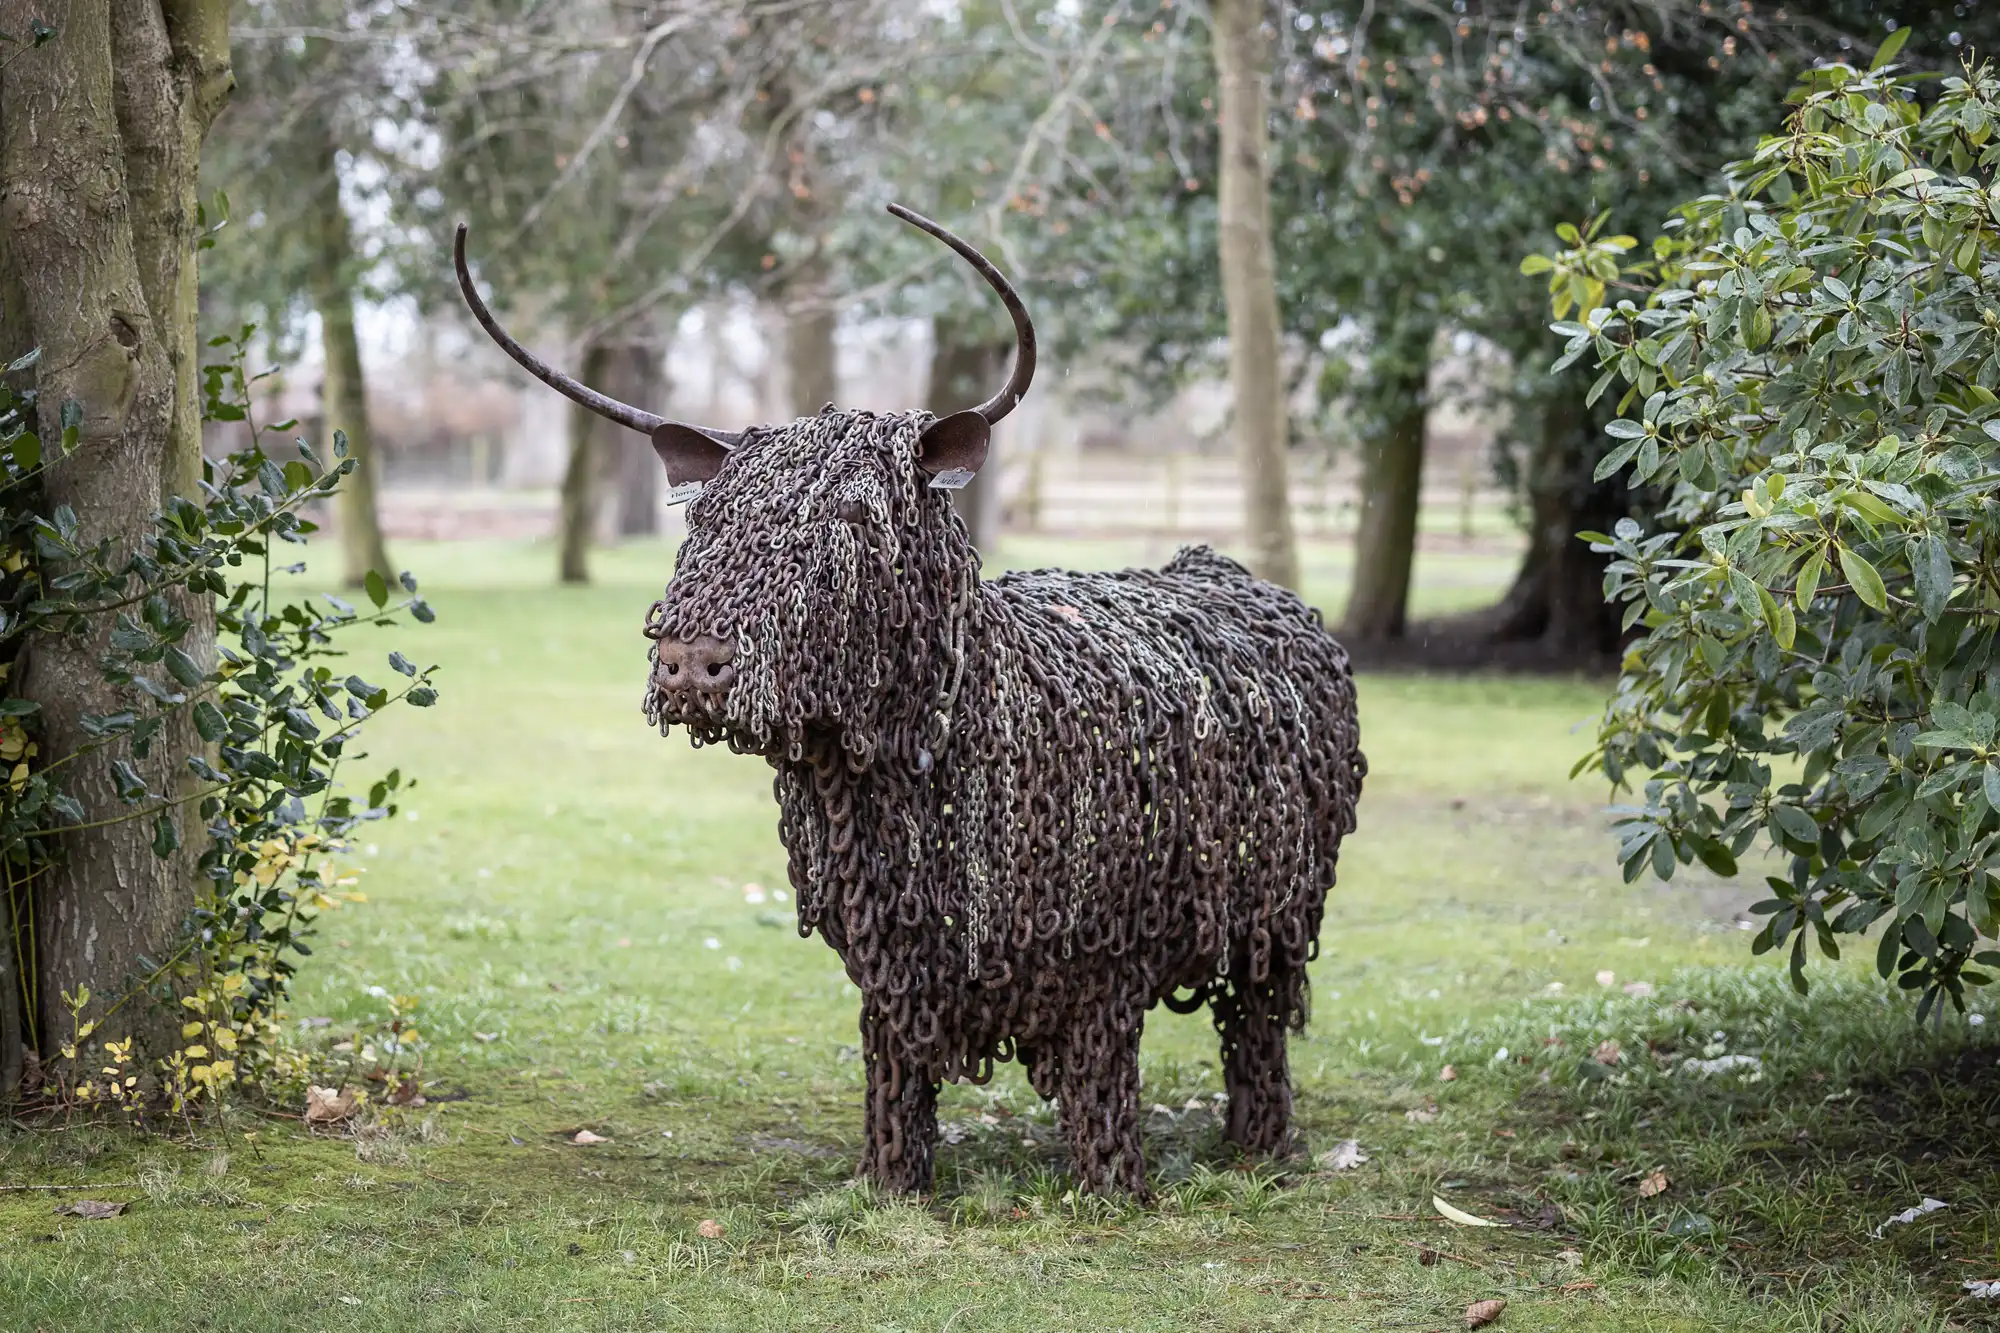 A metal chain sculpture of a bull with long hair and horns stands on a grassy area surrounded by trees and shrubs.